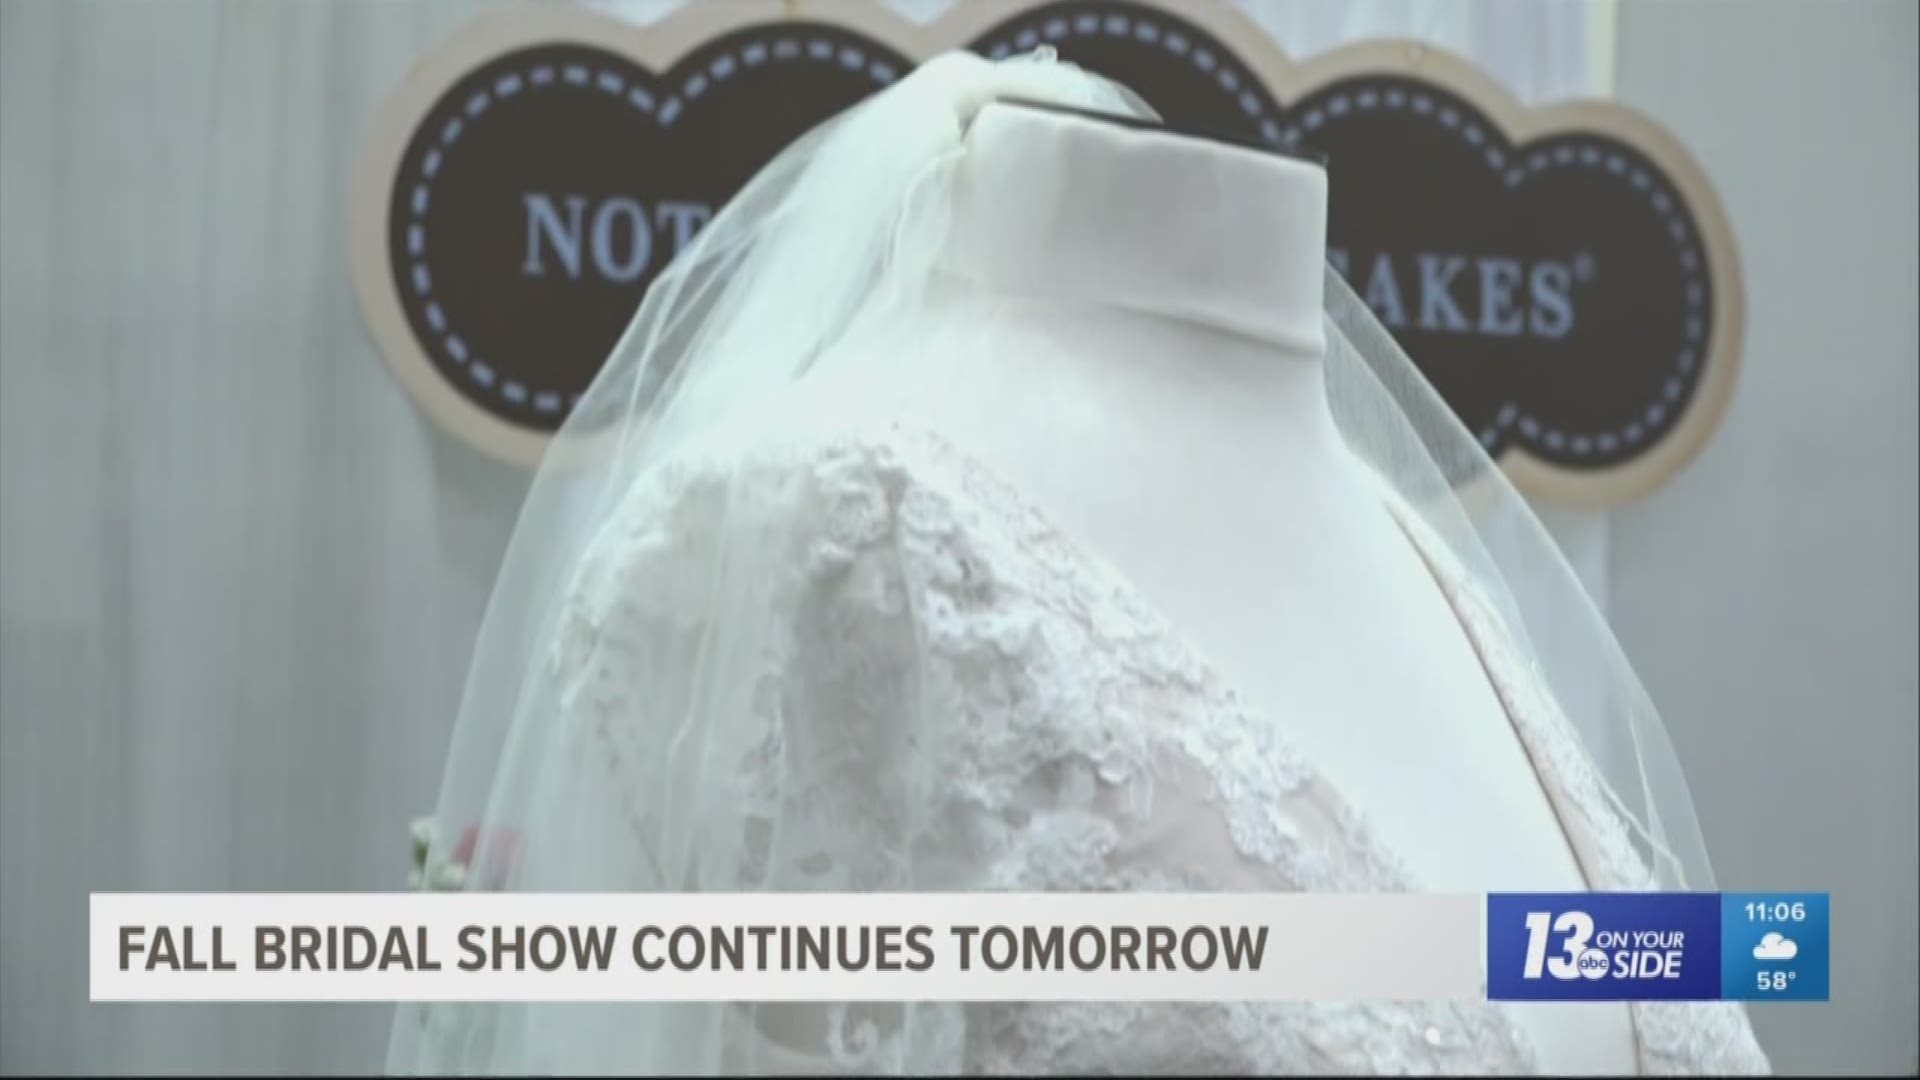 Fall Bridal Show held in downtown Grand Rapids